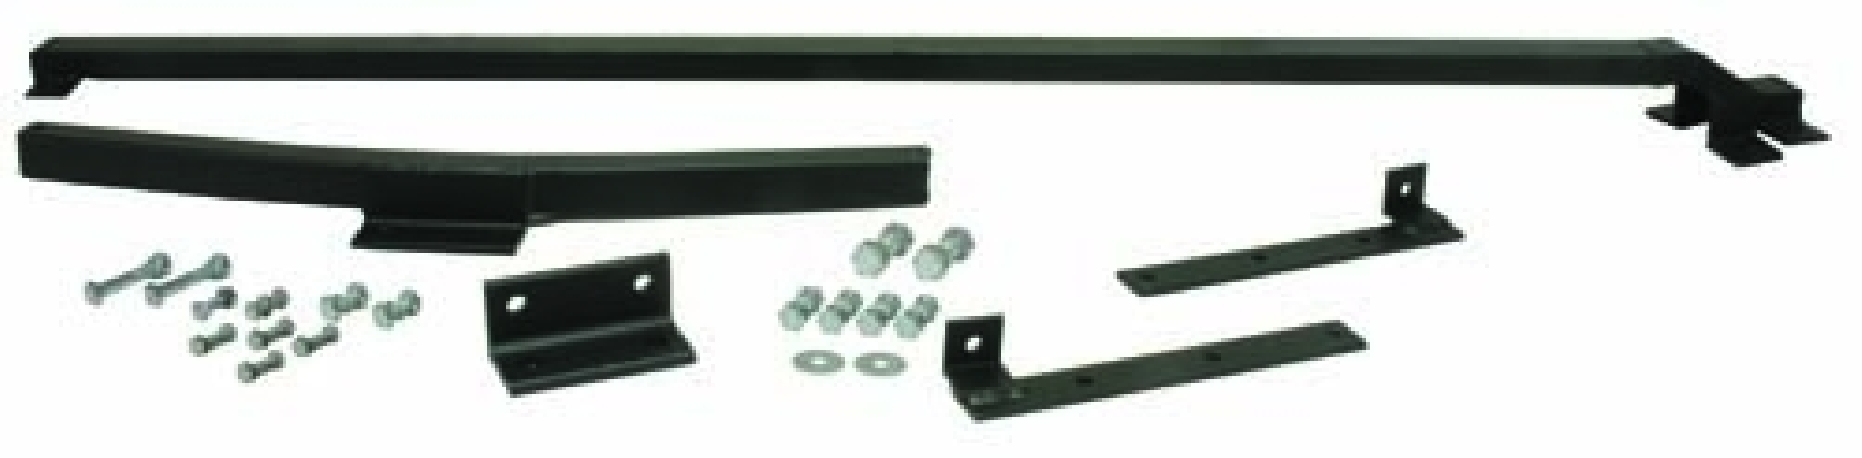 Tow Bar Bracket, T1  67 and 1200  75